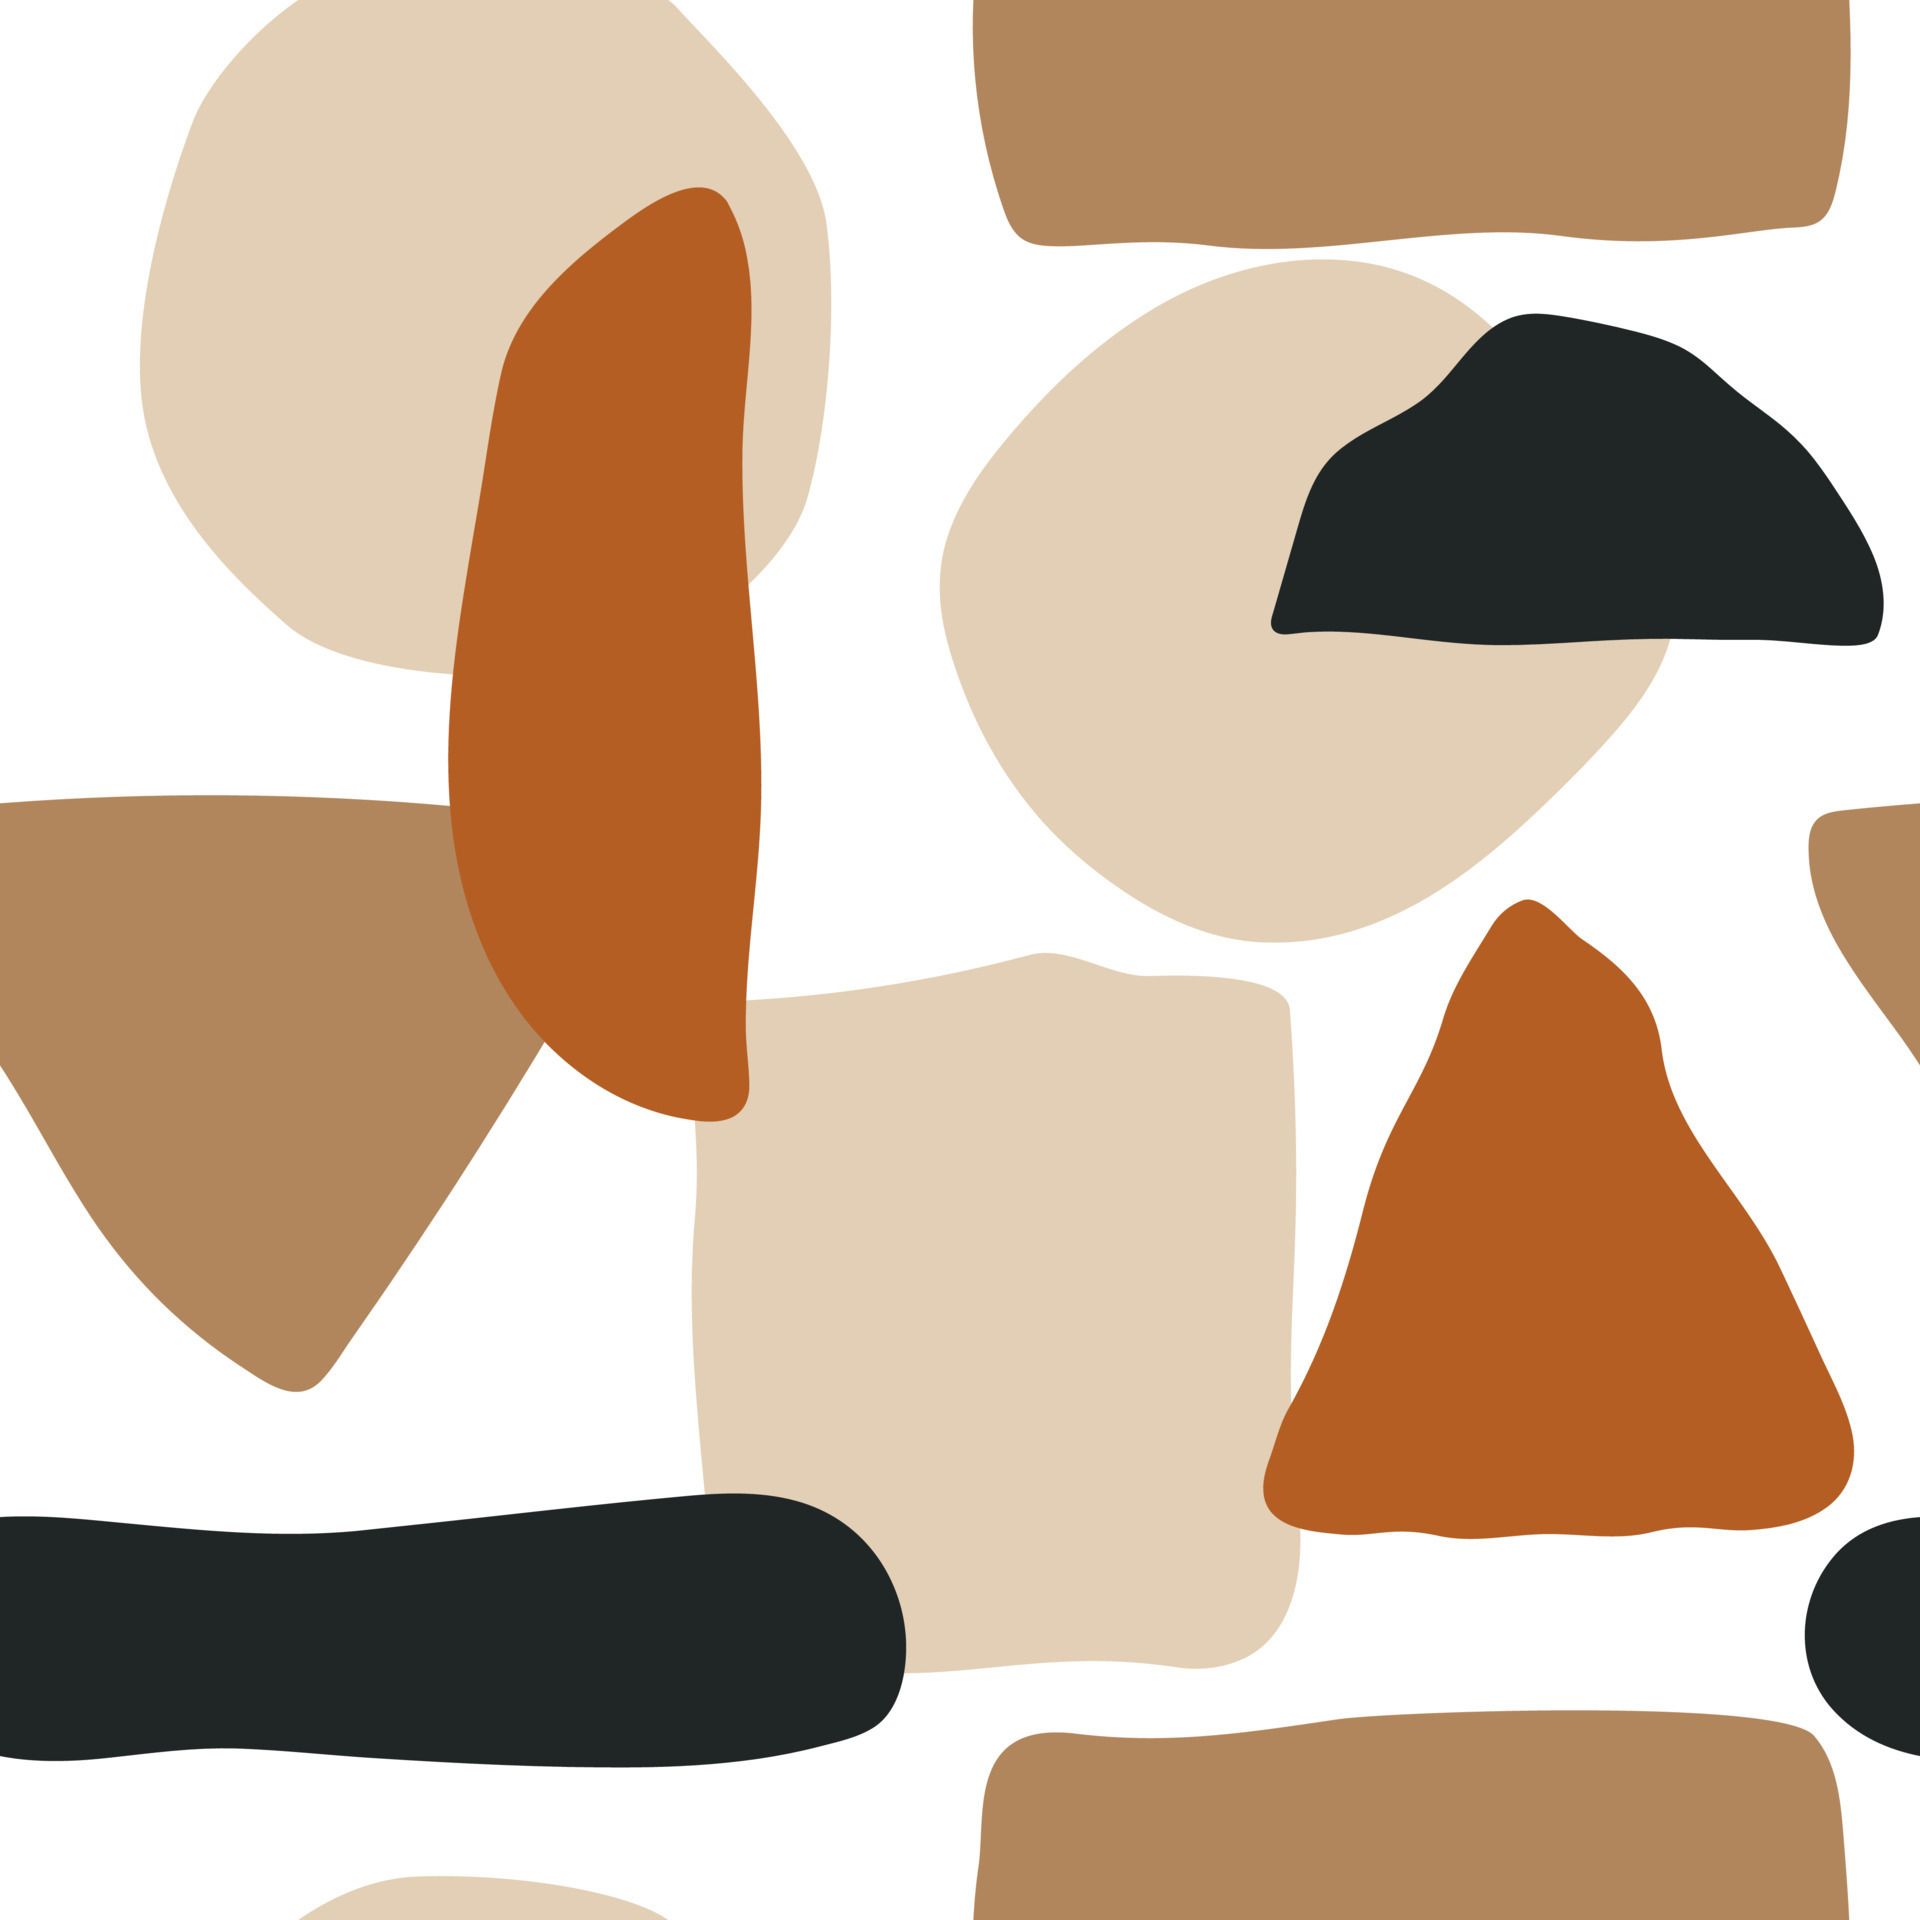 An abstract pattern of irregular shapes in earthy tones - Terrazzo